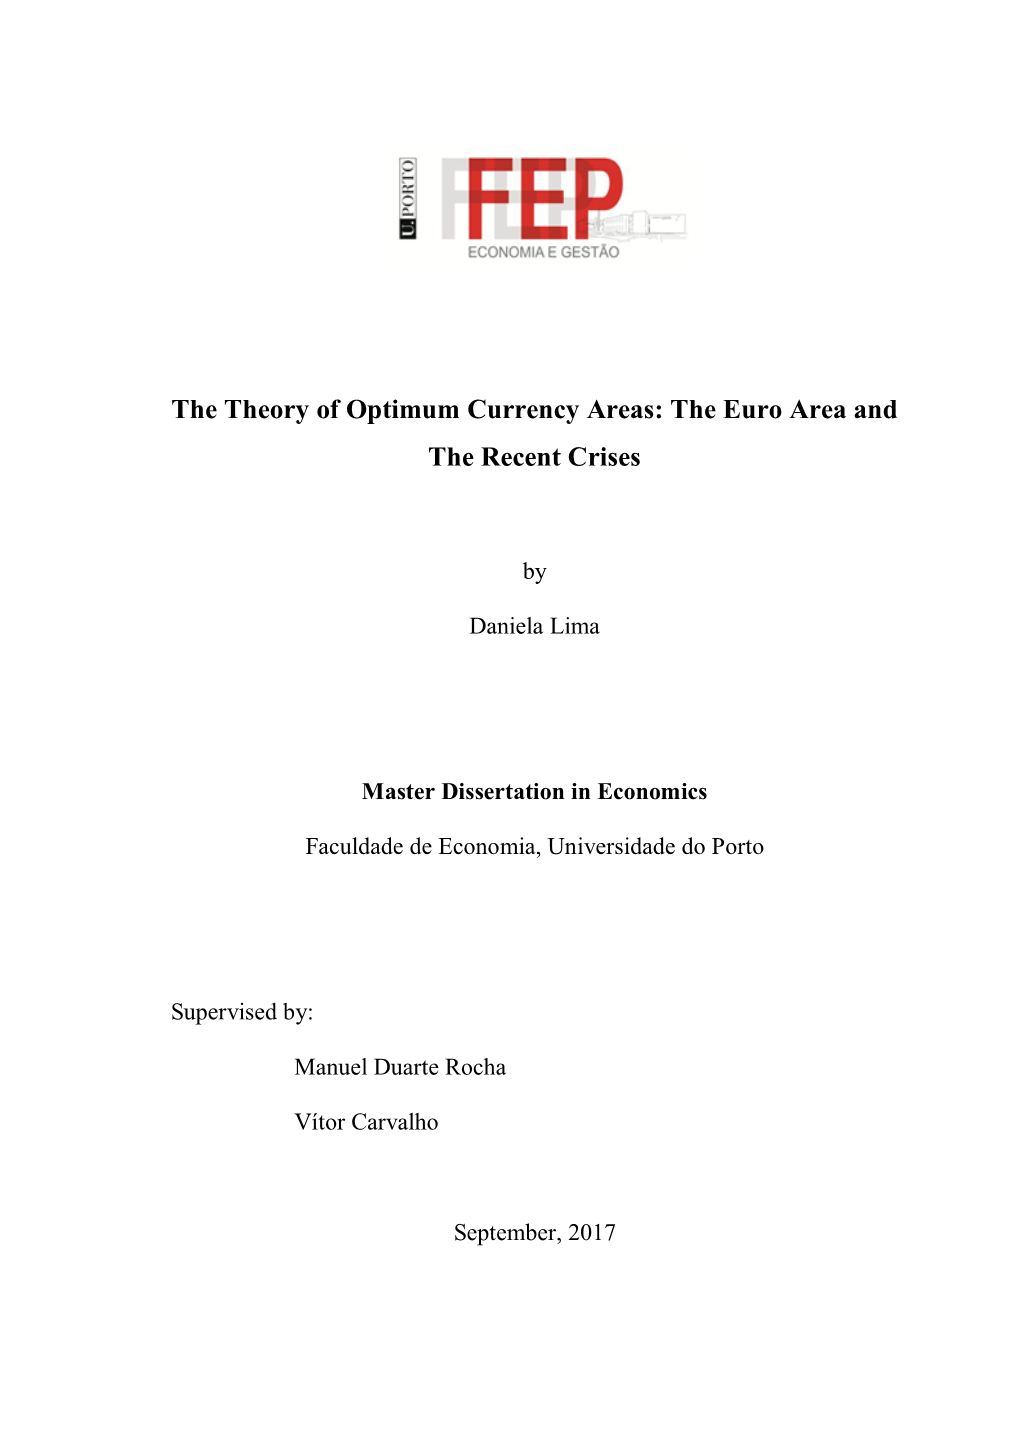 The Theory of Optimum Currency Areas: the Euro Area and the Recent Crises